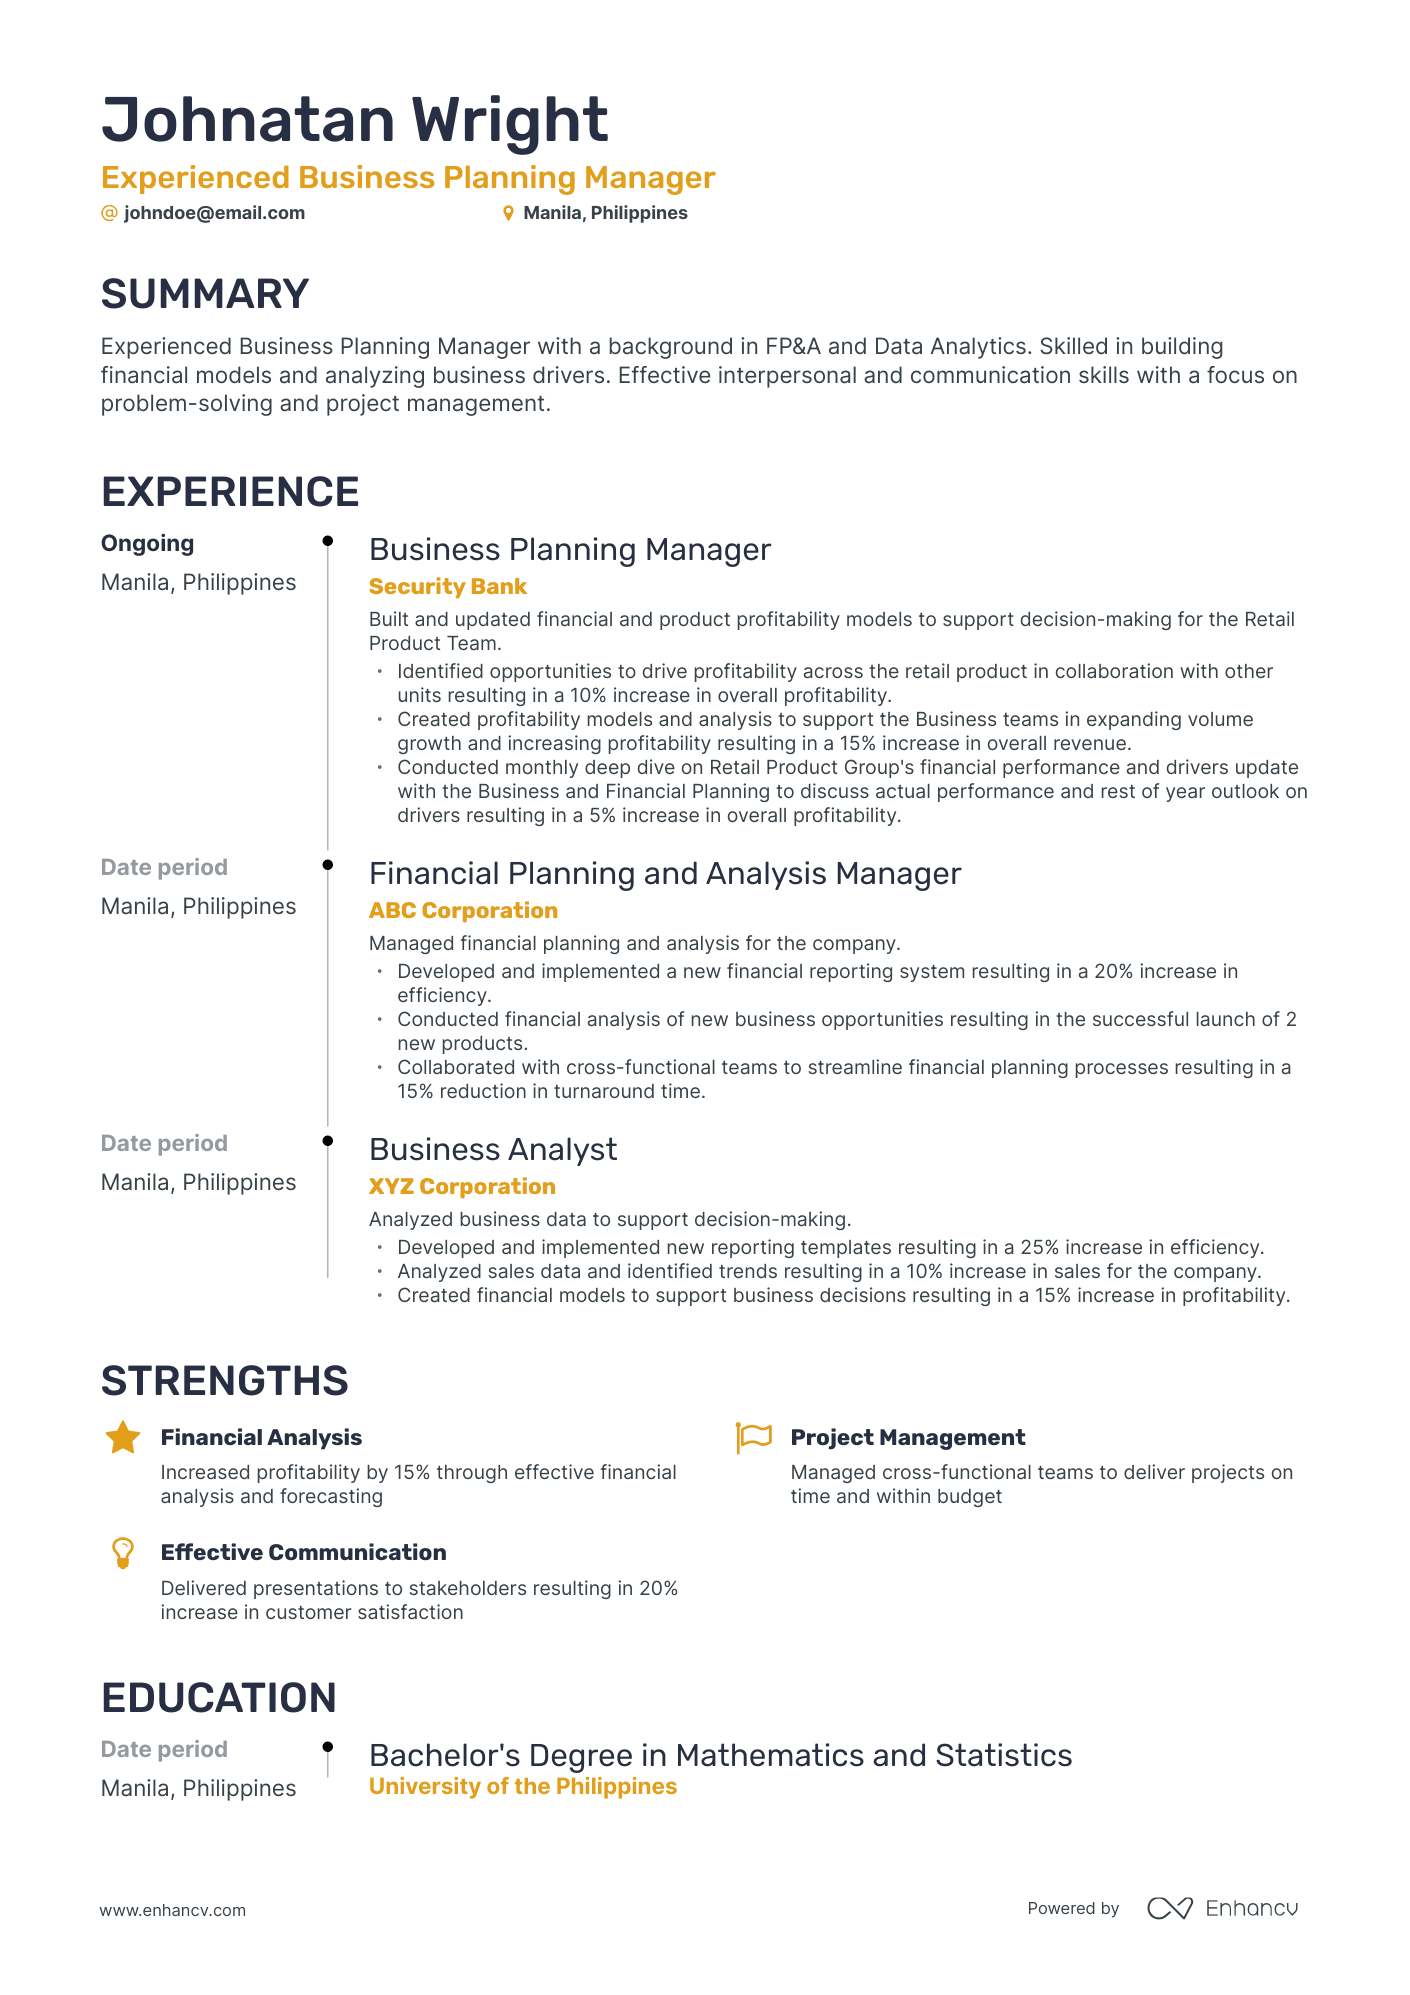 Timeline Business Planning Manager Resume Template